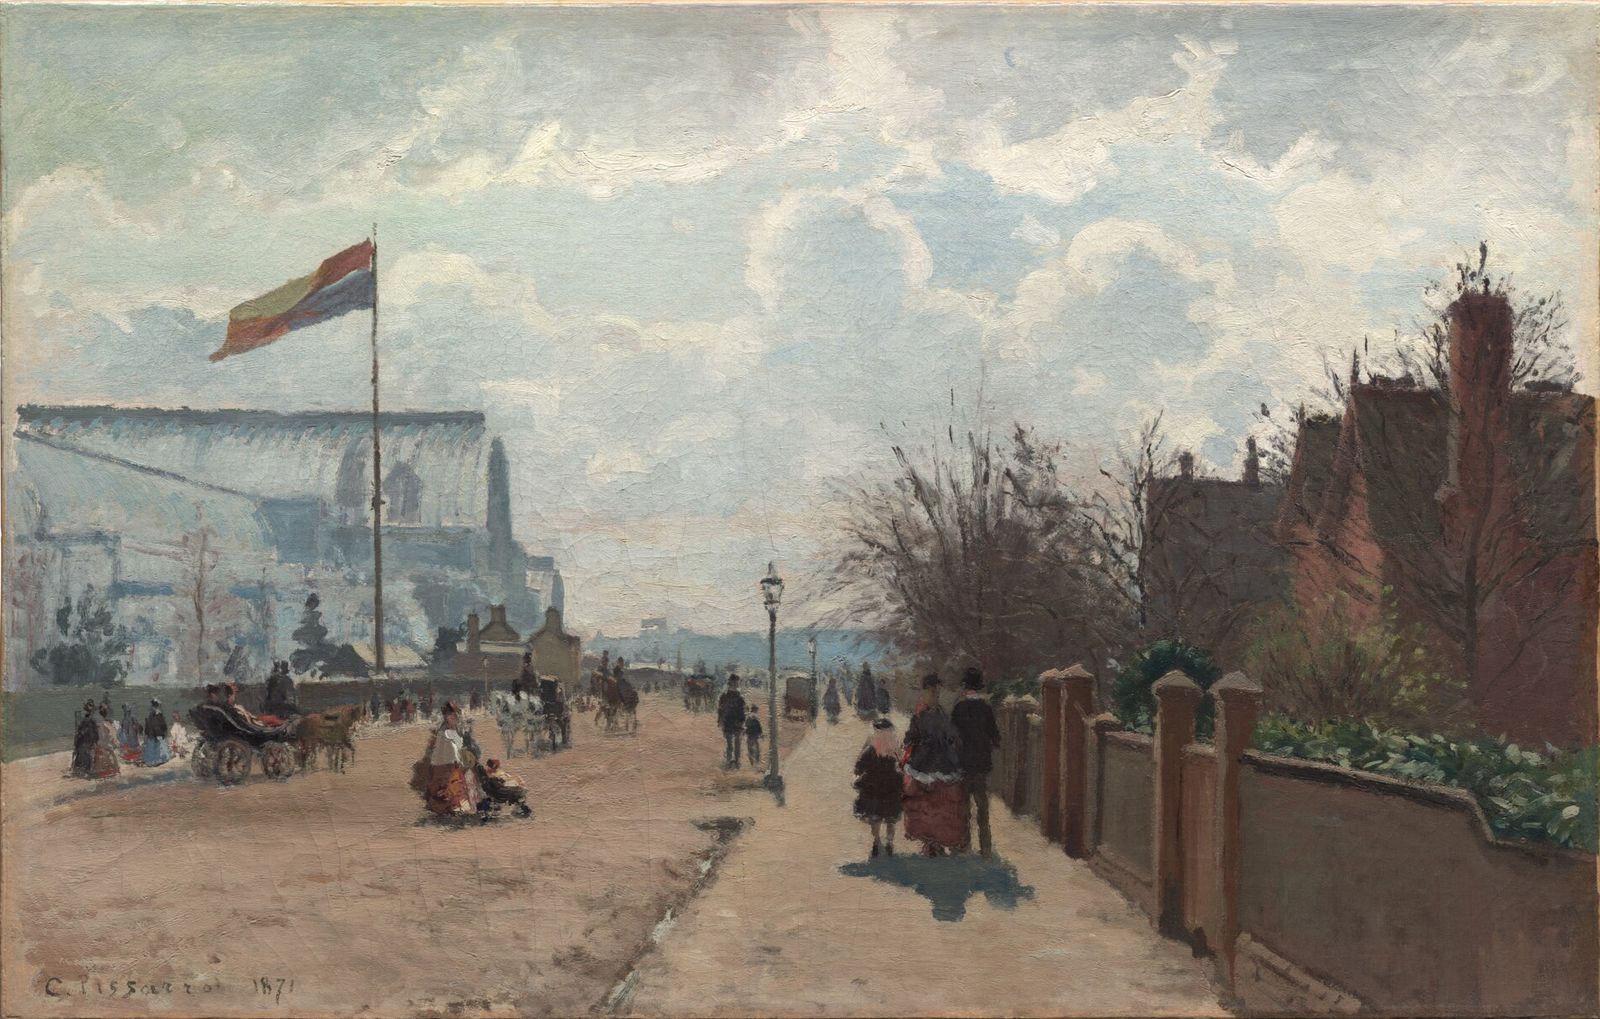 http://impressionism.su/pissarro/picture/The%20Crystal%20Palace.jpg